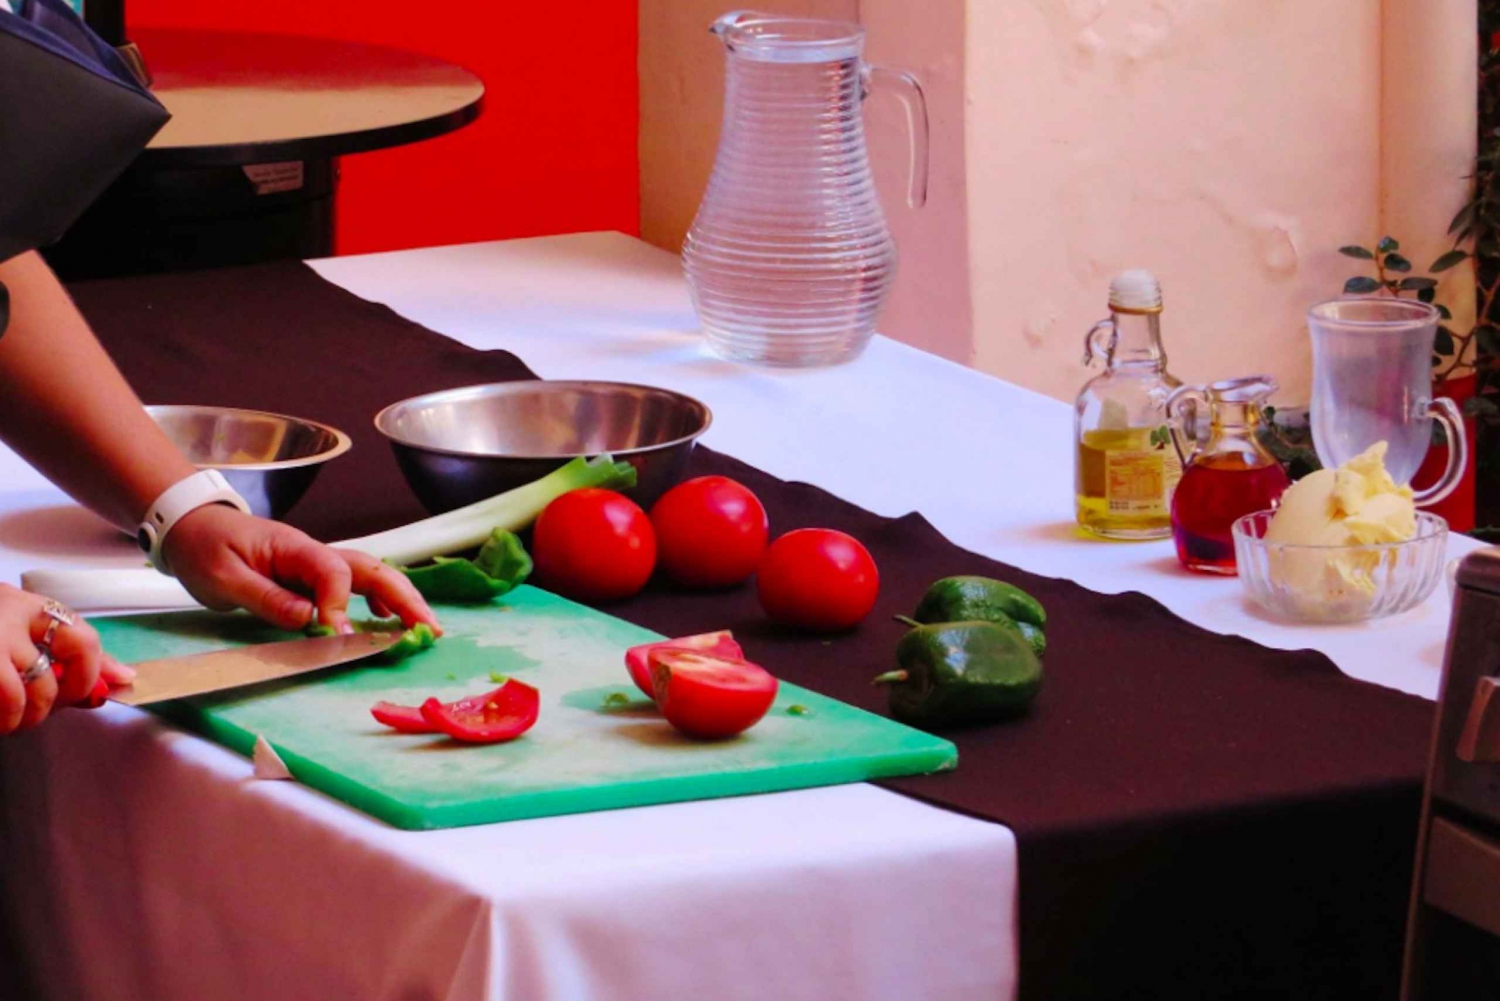 Quito Cooking Class